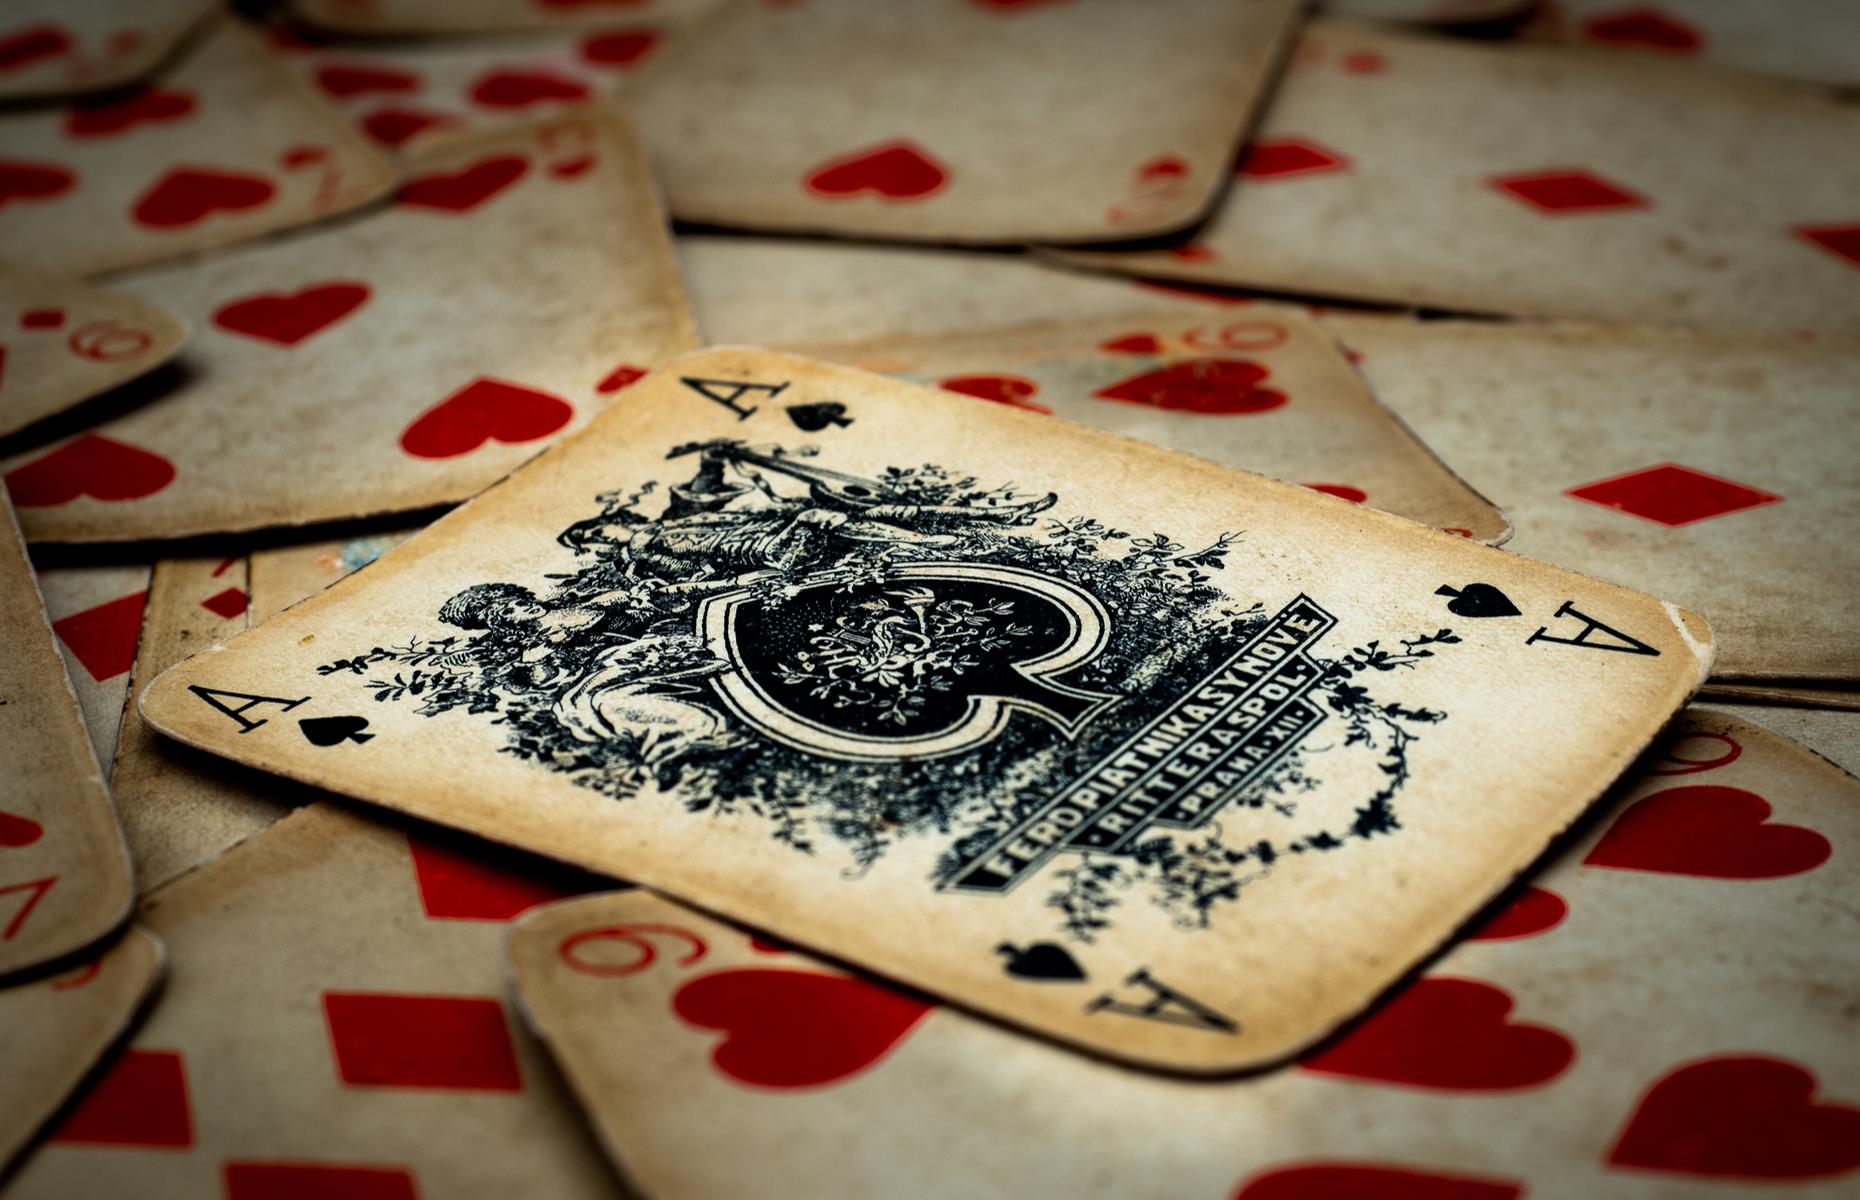 Playing cards (17th century)